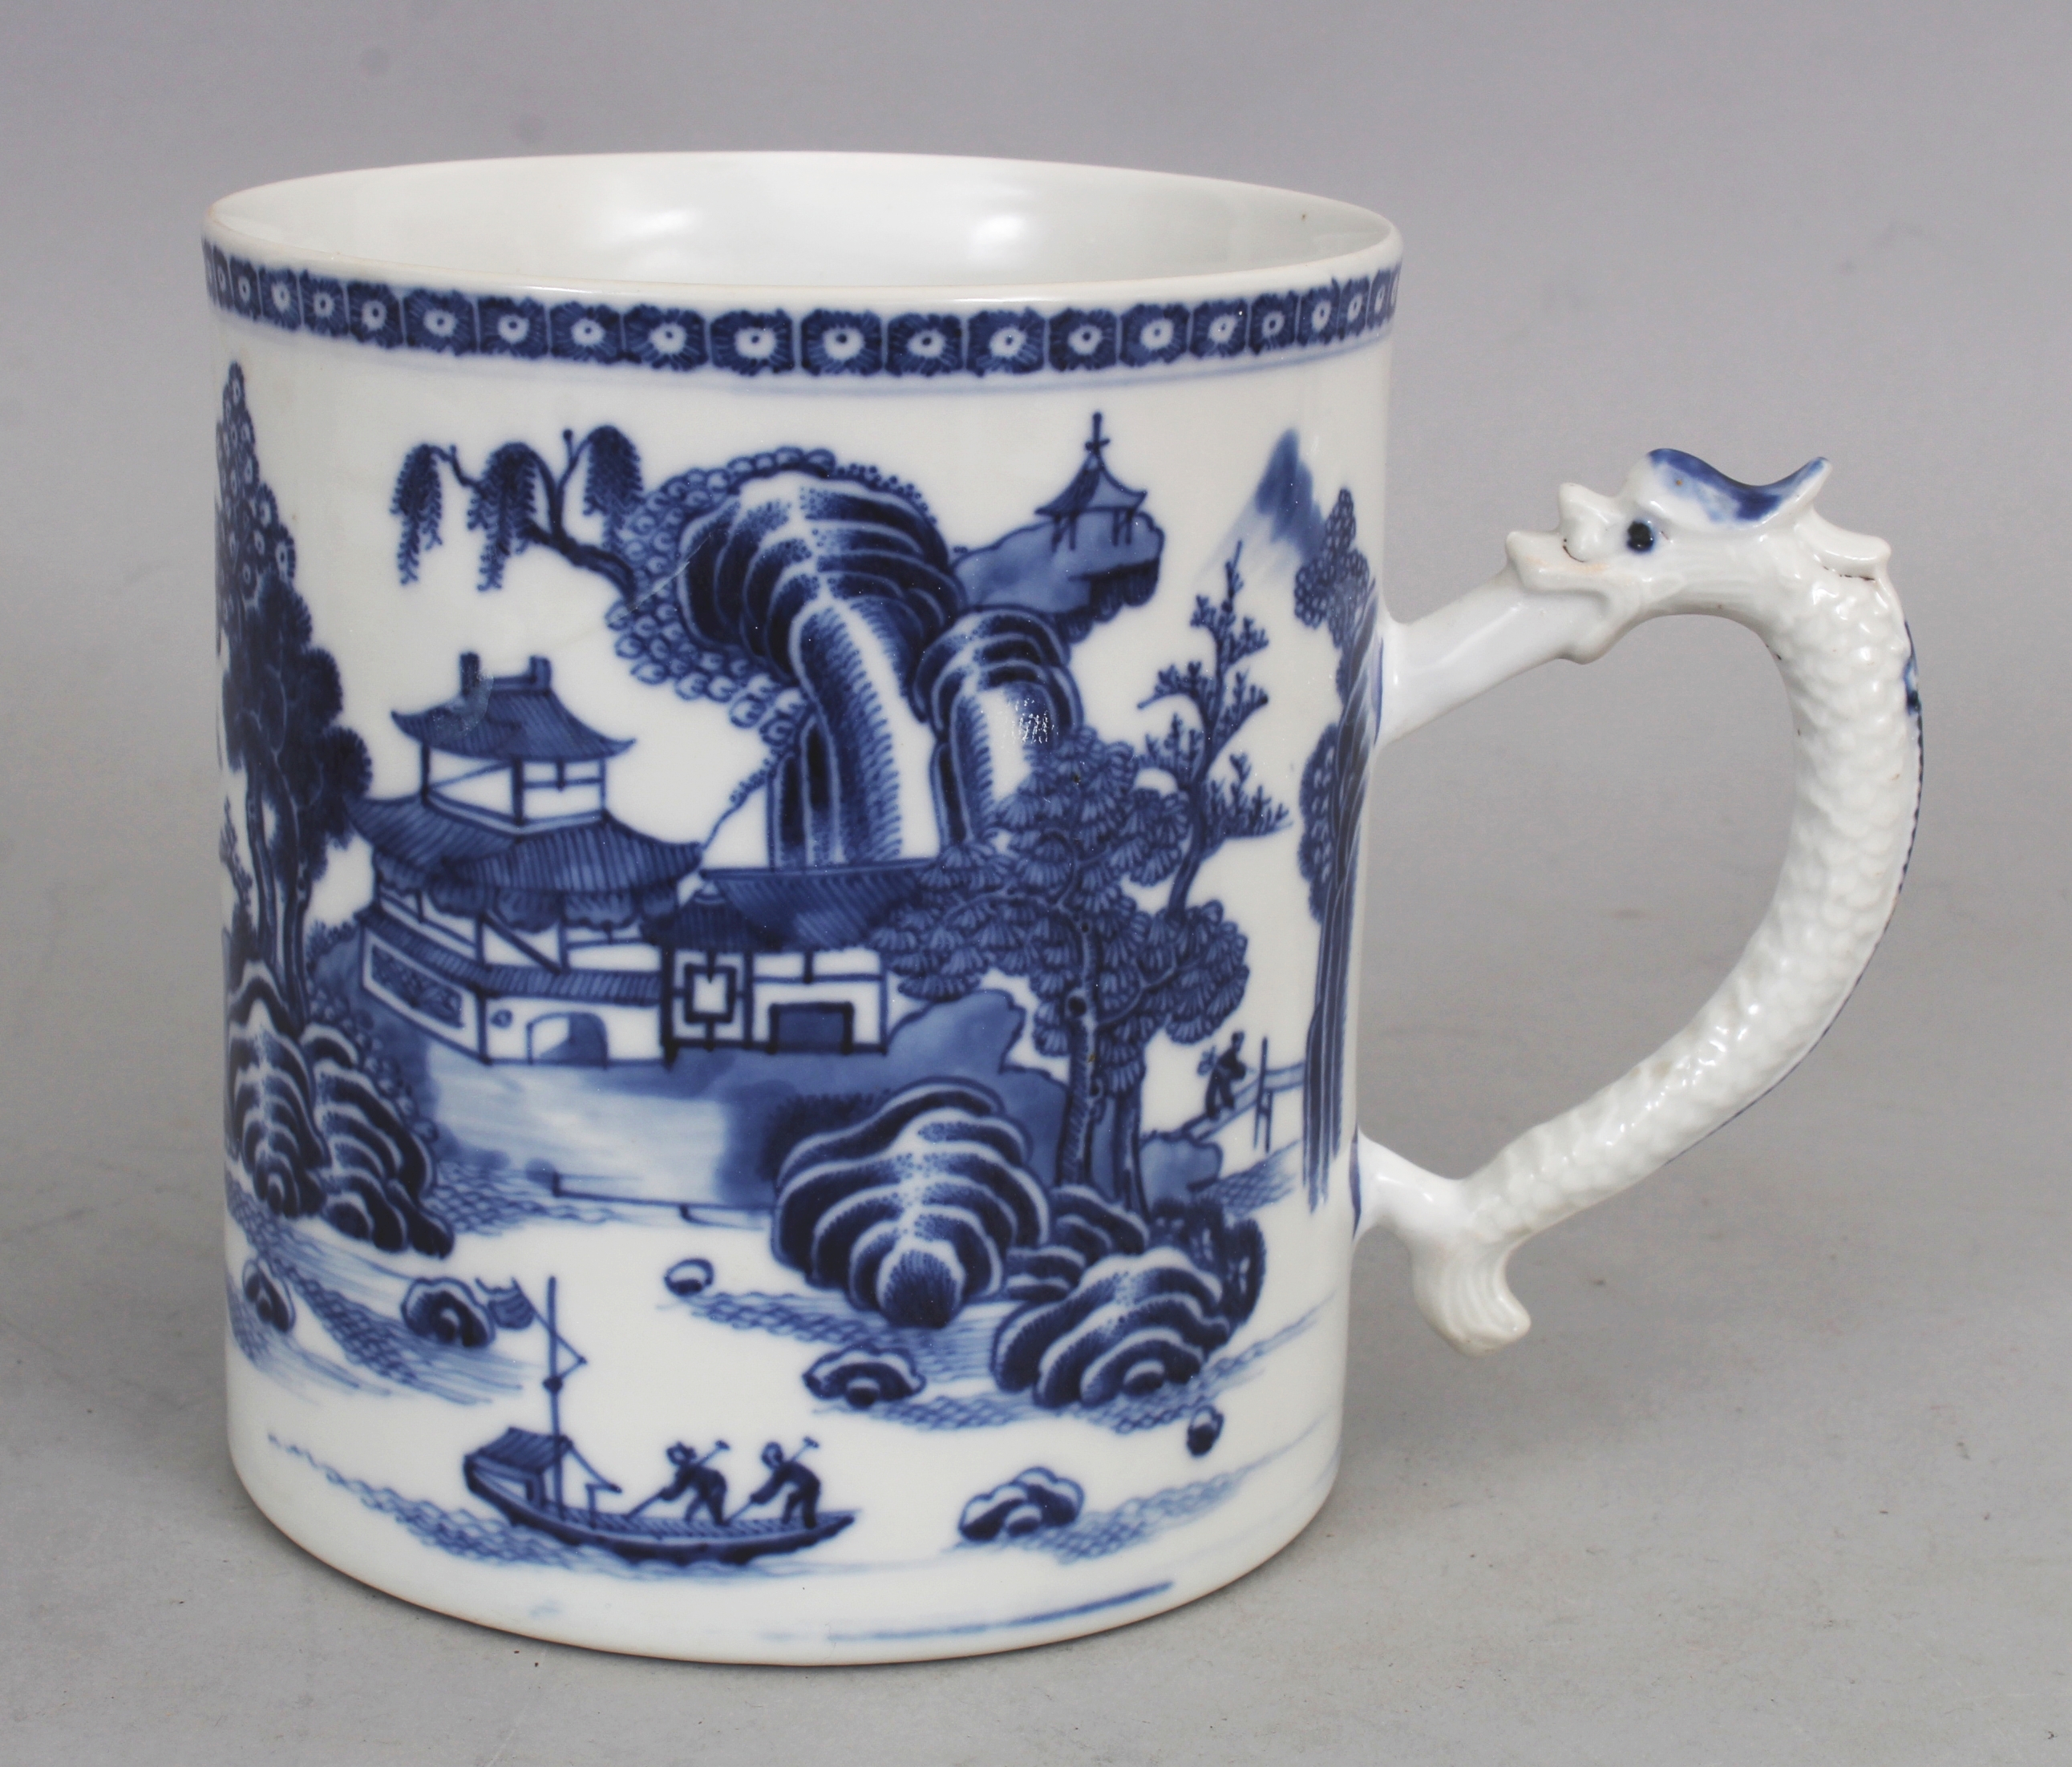 AN 18TH CENTURY CHINESE QIANLONG PERIOD BLUE & WHITE PORCELAIN TANKARD, painted with a river